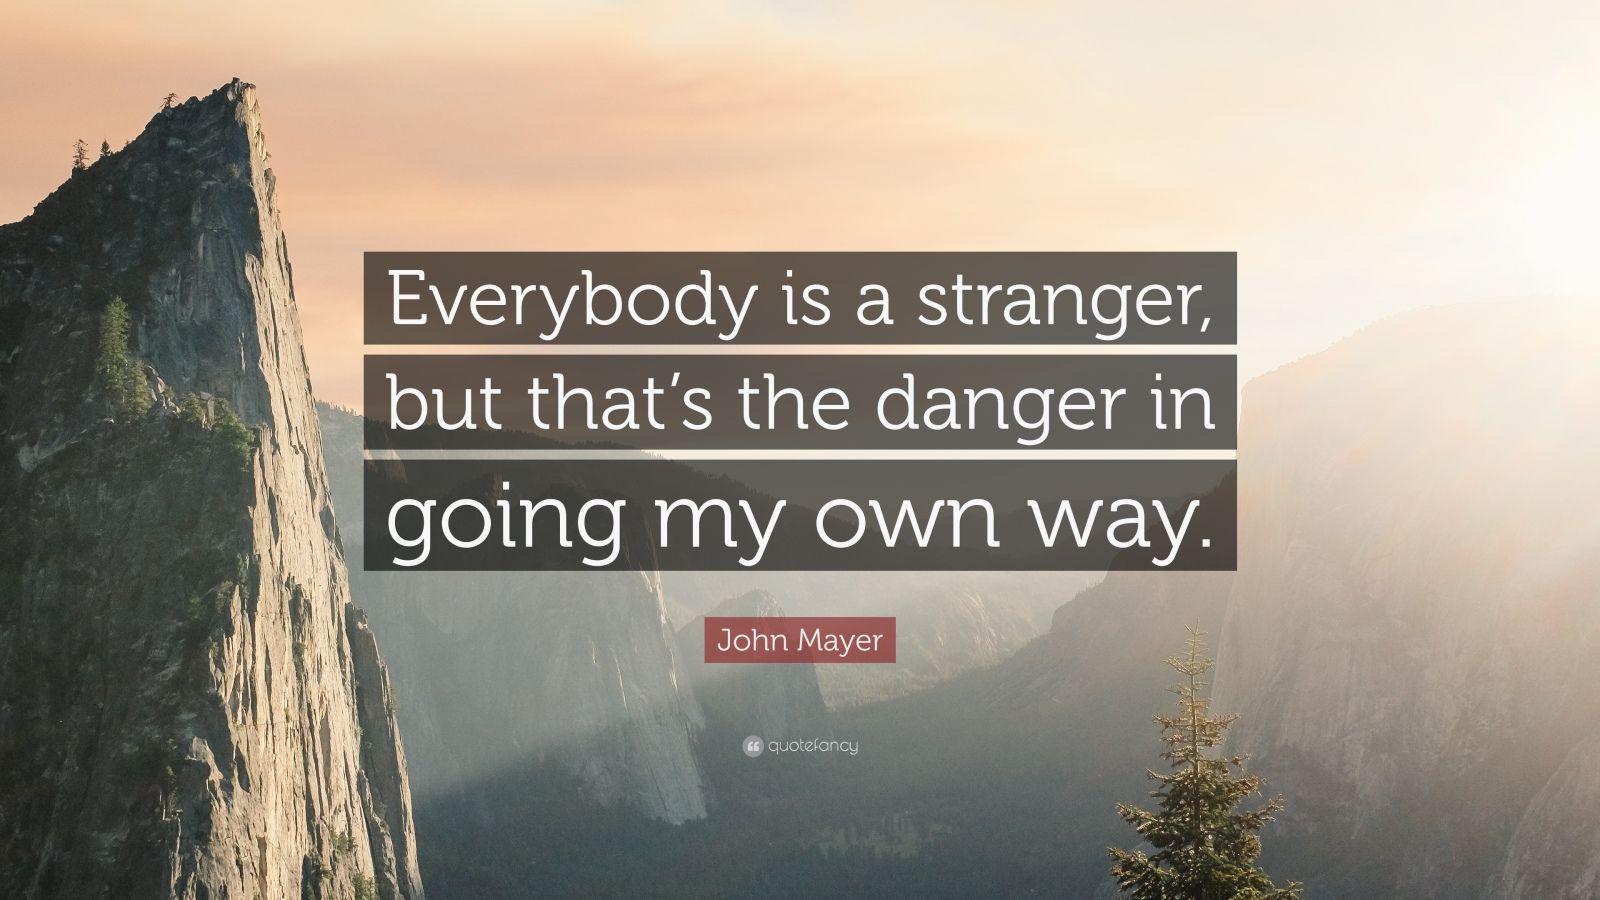 John Mayer Quote Everybody Is A Stranger But That S The Danger In Going My Own Way